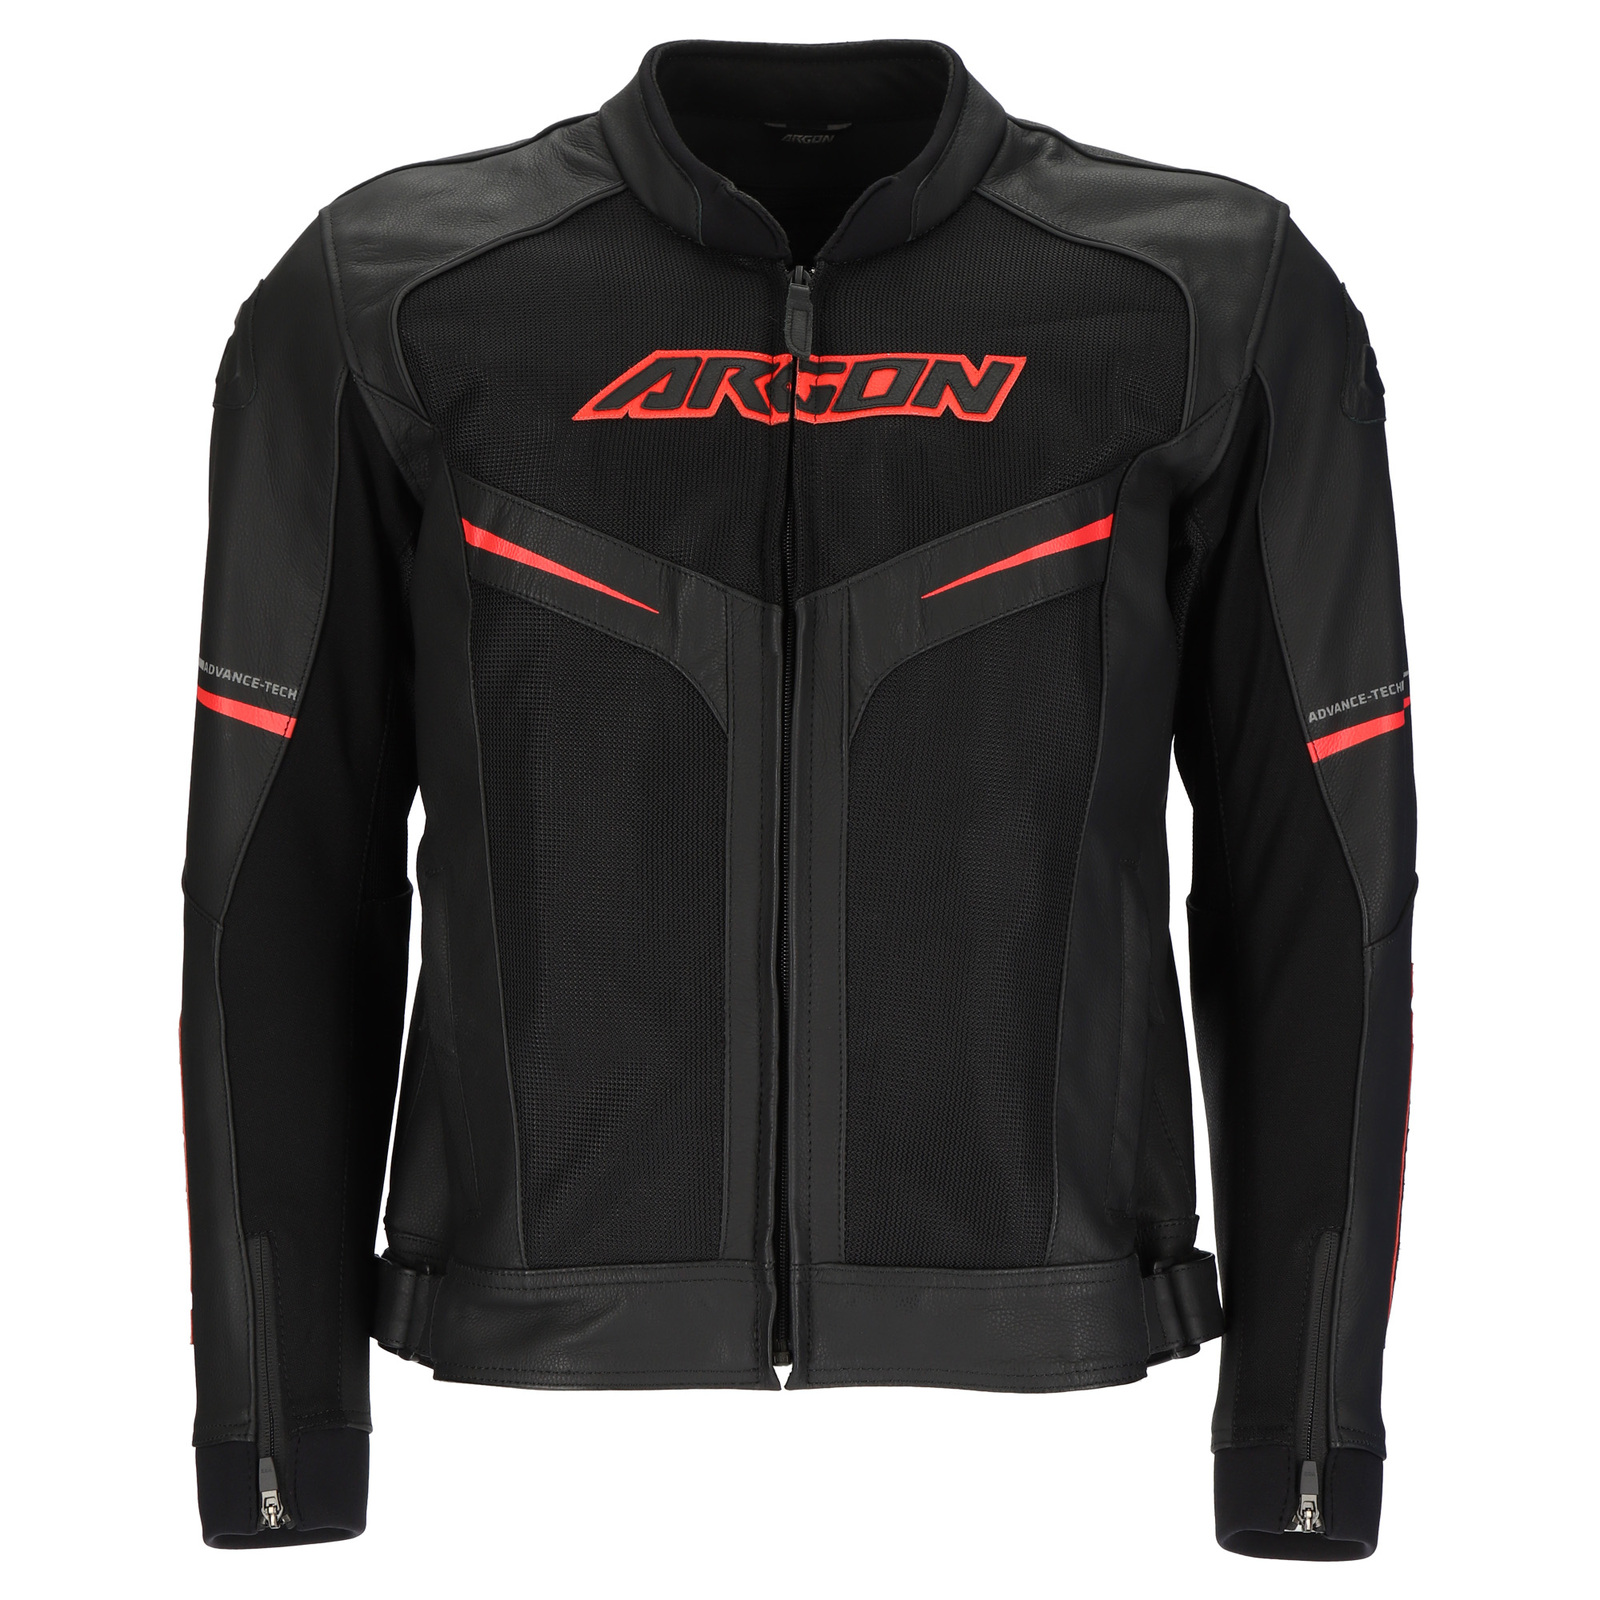 FUSION JKT BLK RED/48 (S-M).